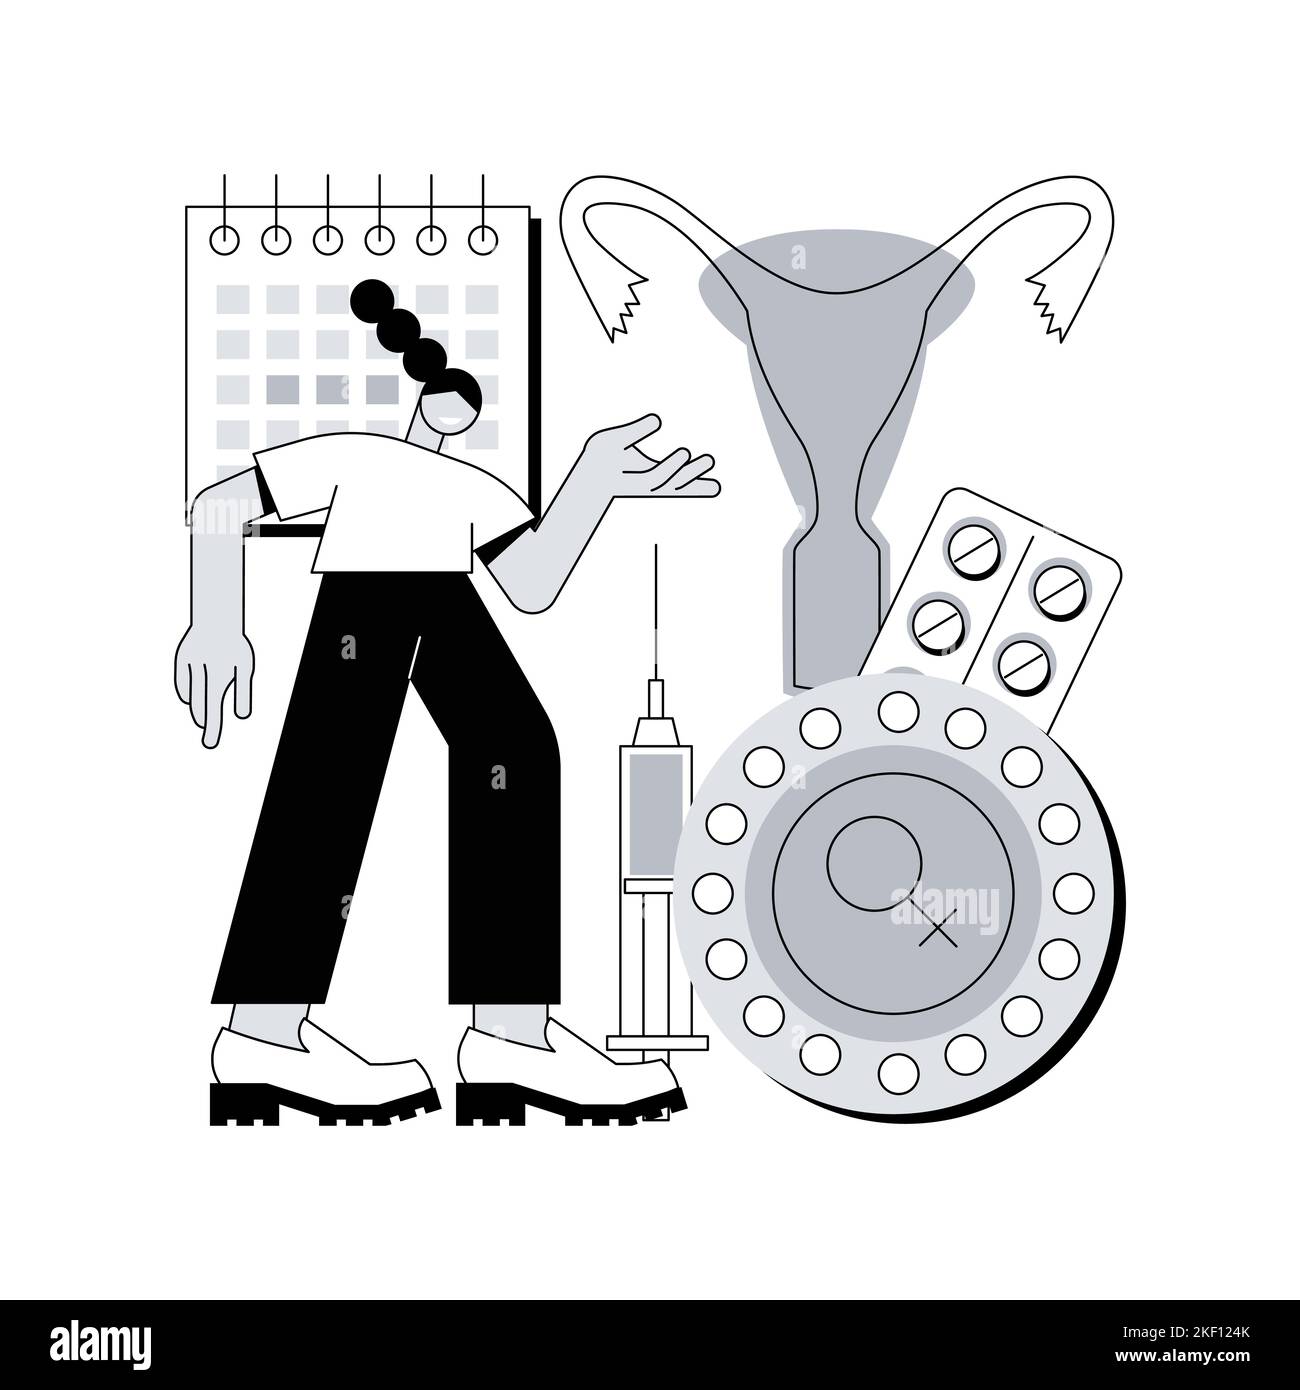 Female contraceptives abstract concept vector illustration. Female contraceptive drug, oral hormonal contraception pill, fertility control, family planning, pregnancy prevention abstract metaphor. Stock Vector